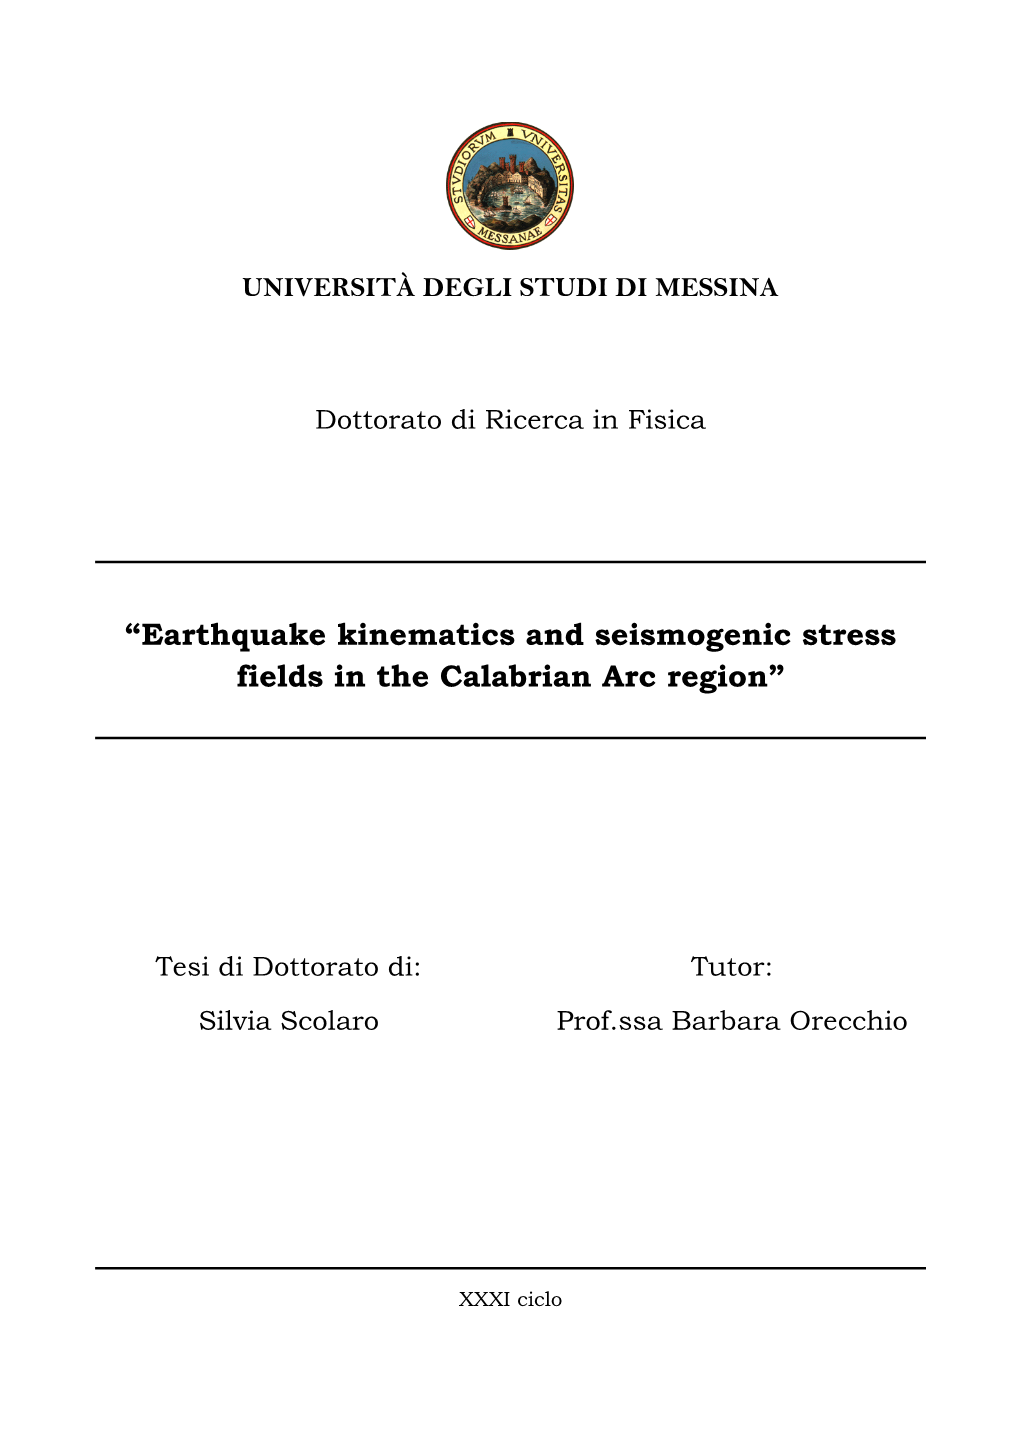 Earthquake Kinematics and Seismogenic Stress Fields in the Calabrian Arc Region”